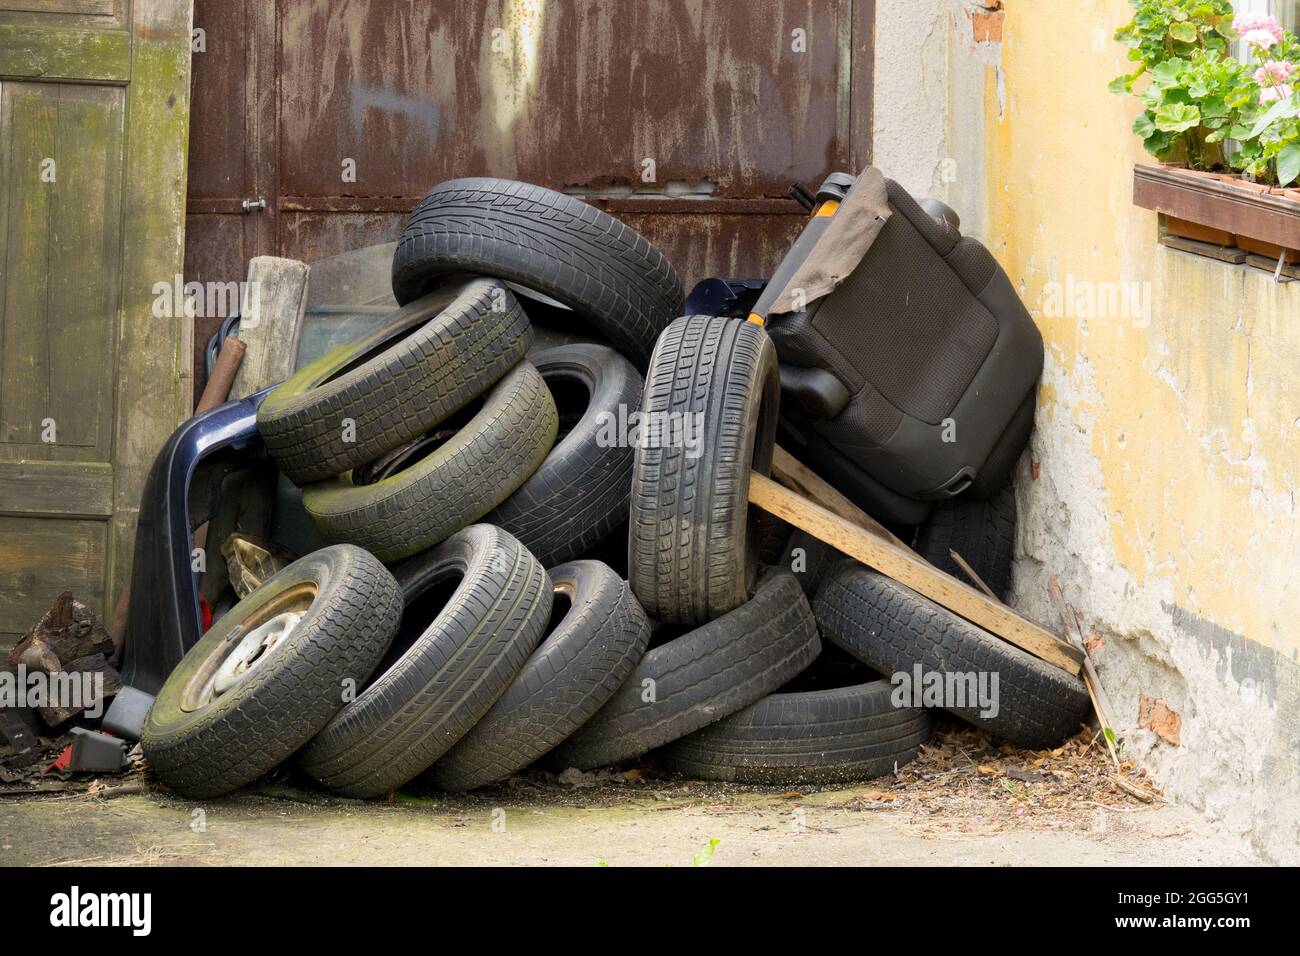 Discarded used, old rubber tires at the house door Stock Photo